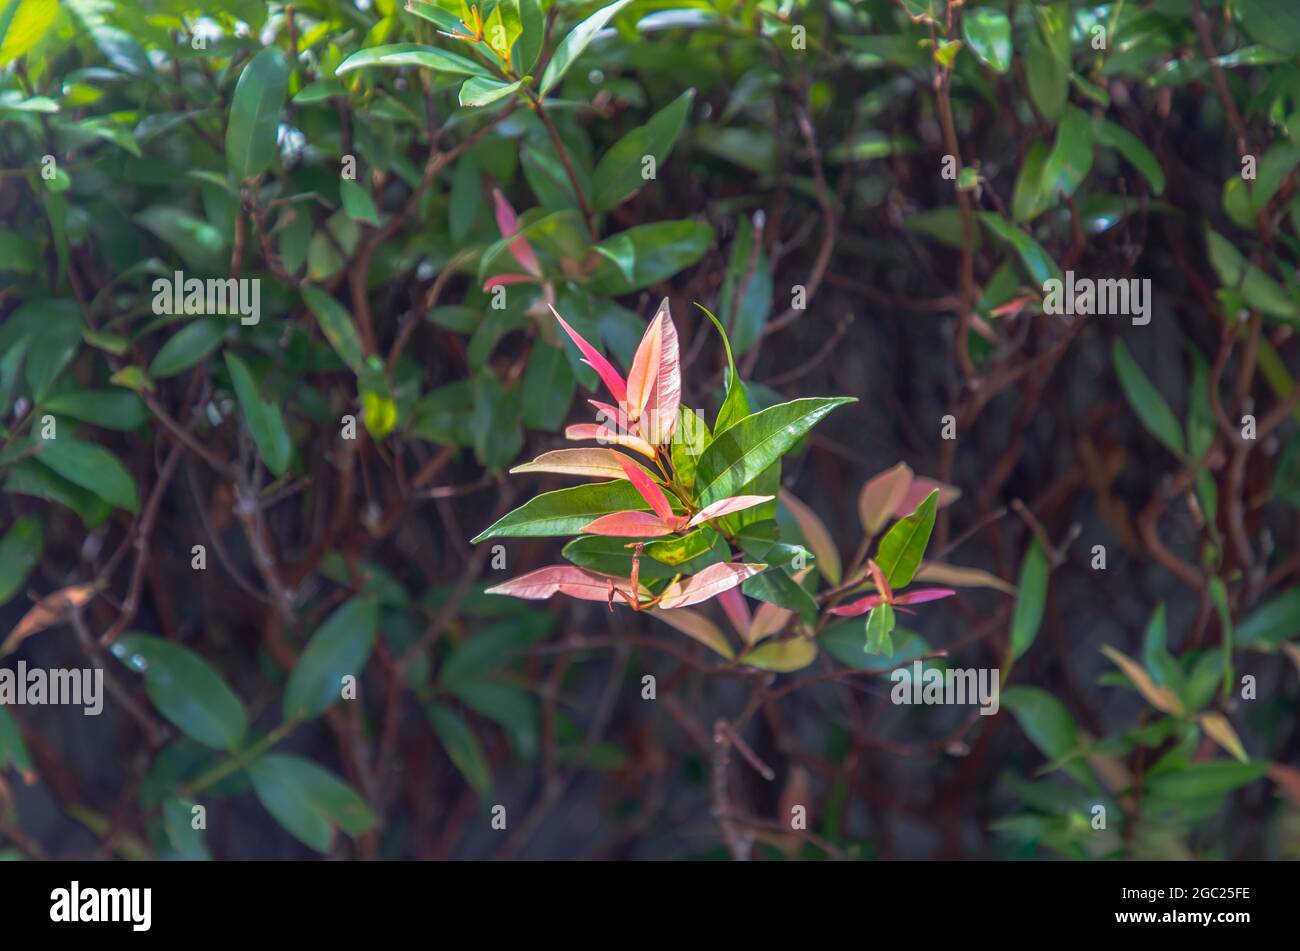 Red leaf photinia of Photinia glabra Robin. Flower's leaves are raised to receive soft sunlight in the morning Dense green leaves with red flowers. Co Stock Photo